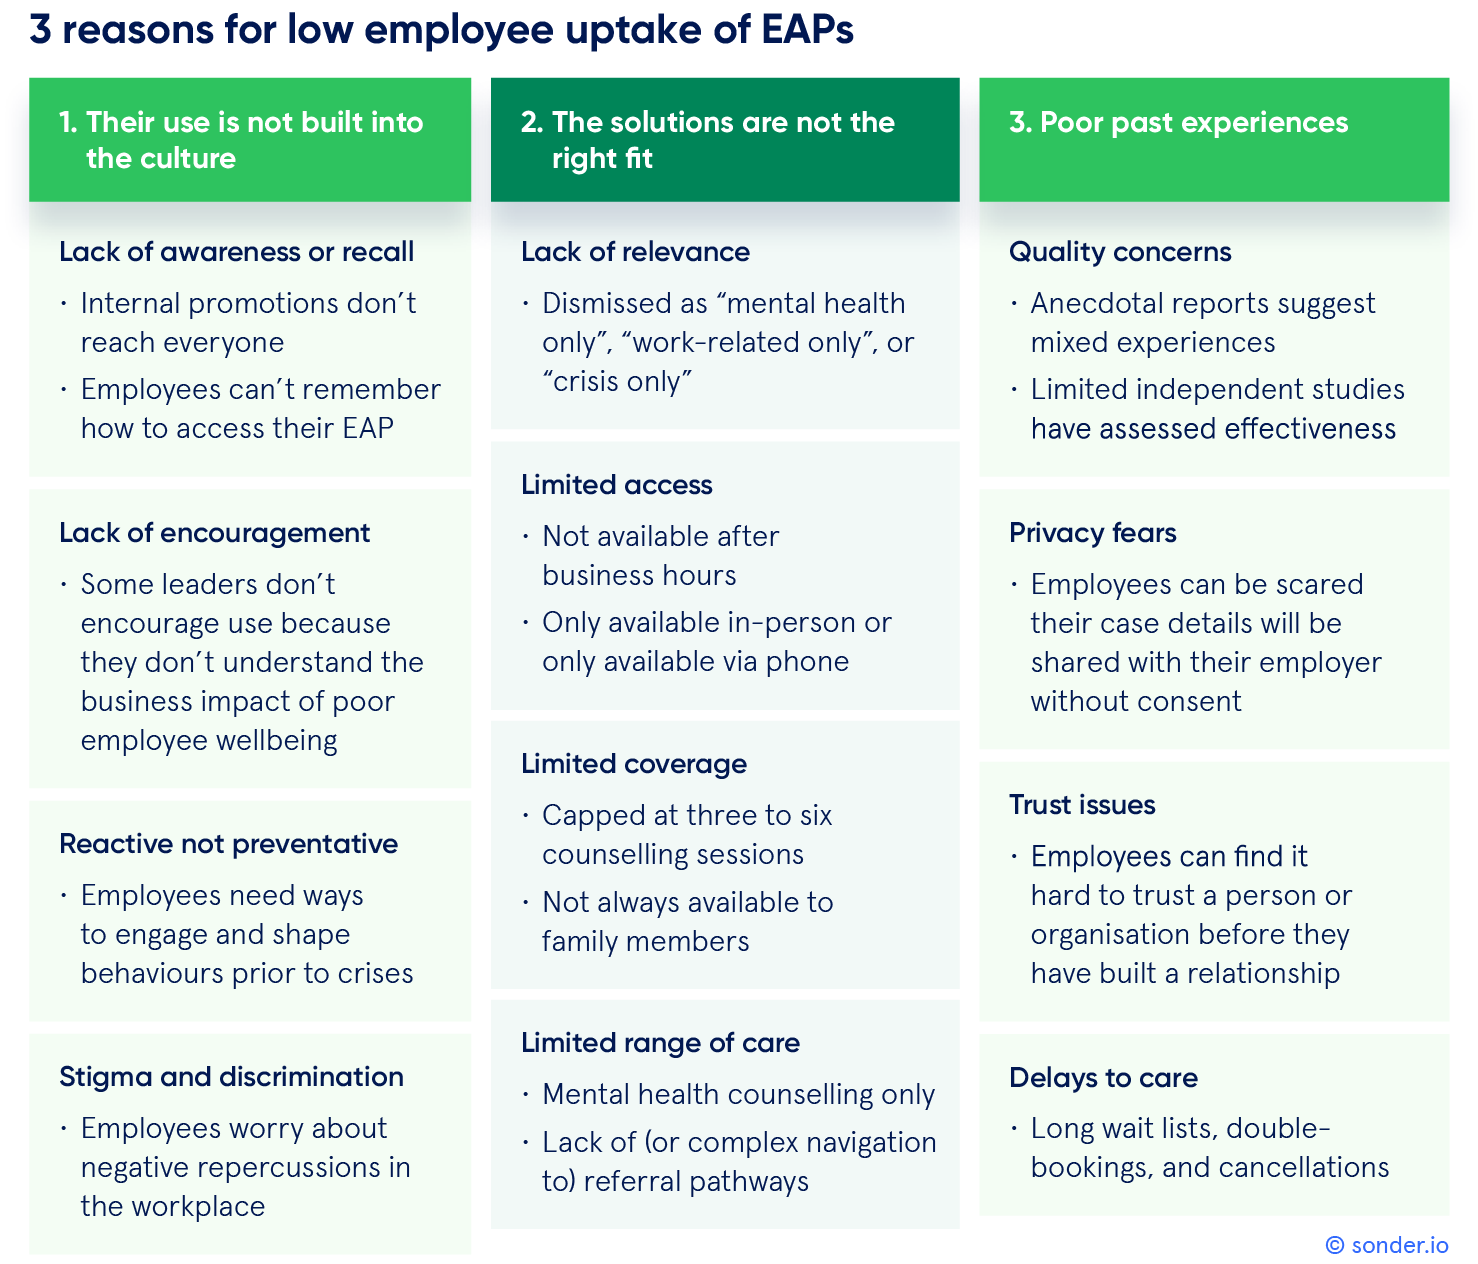 3 reasons for low employee uptake of EAPs